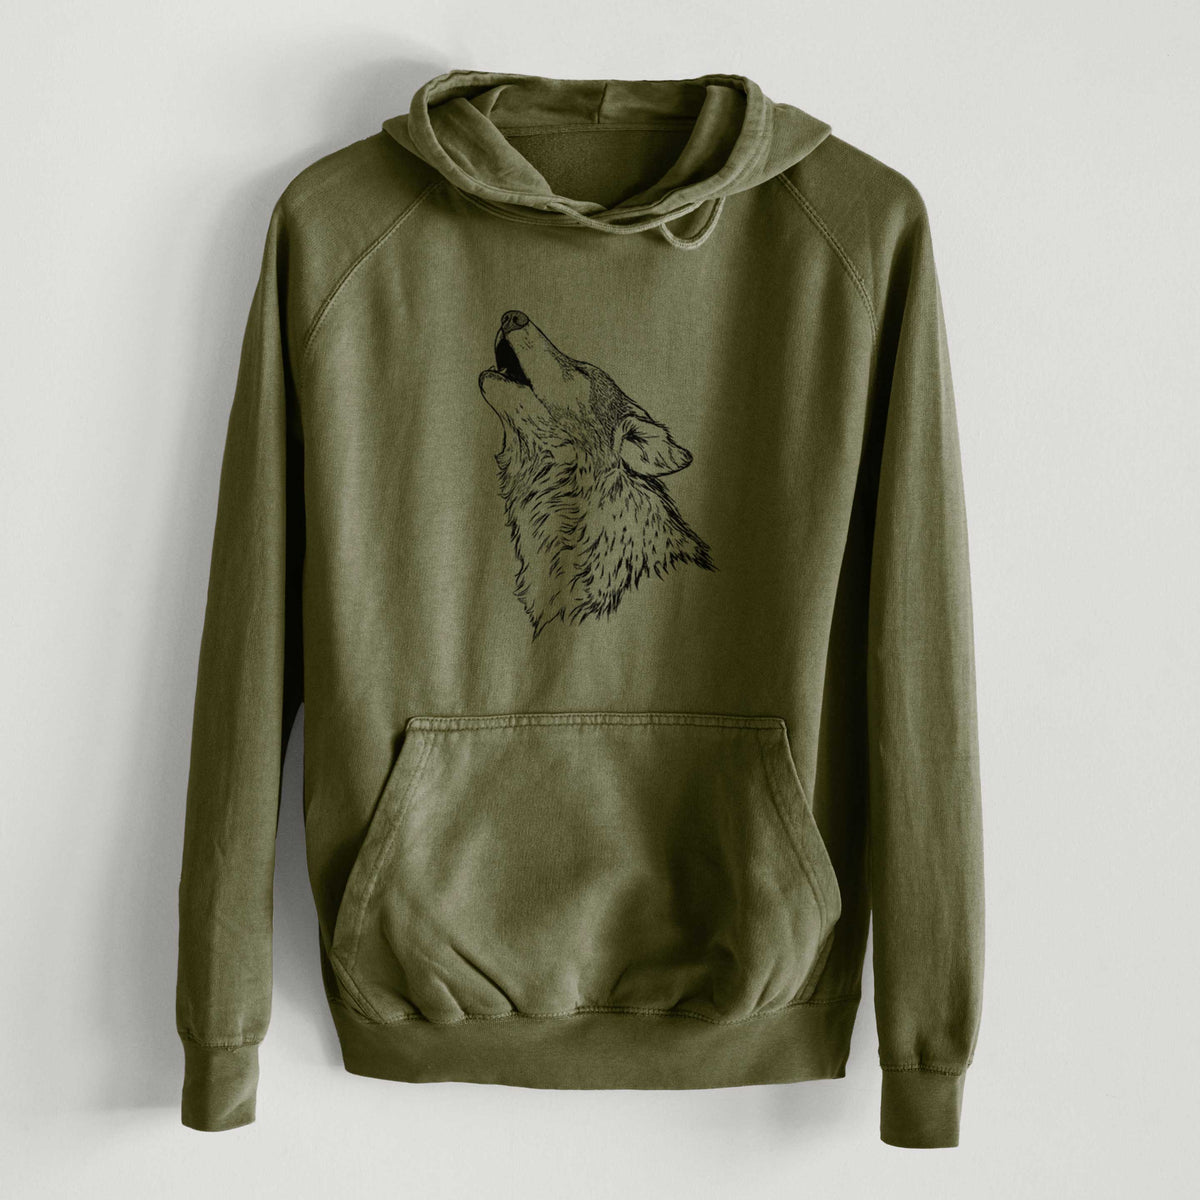 Canis lupus - Grey Wolf Howling  - Mid-Weight Unisex Vintage 100% Cotton Hoodie